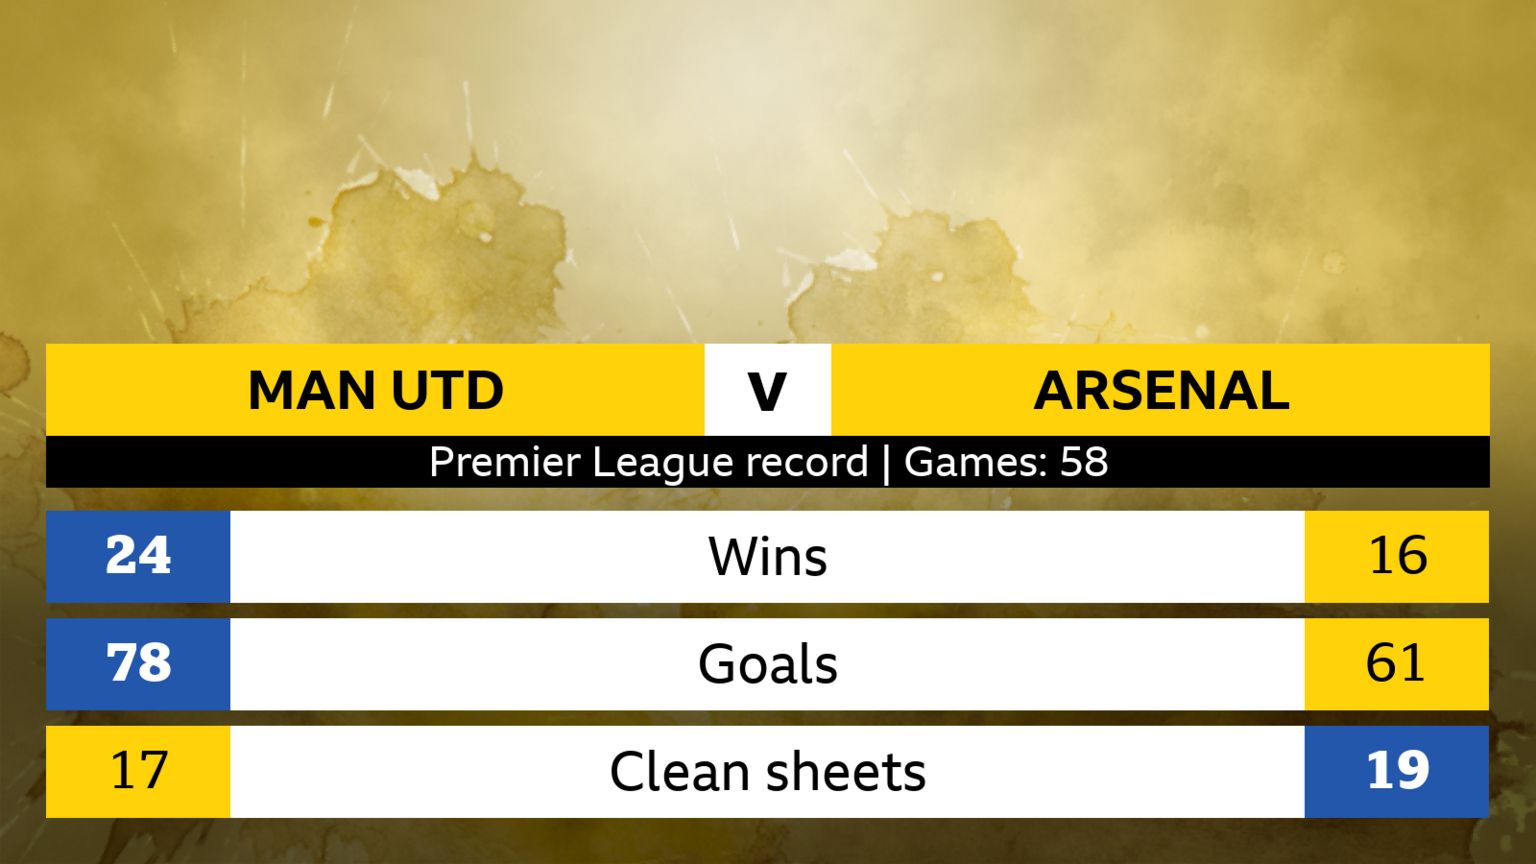 Arsenal vs Manchester United: Know head-to-head record and other key stats